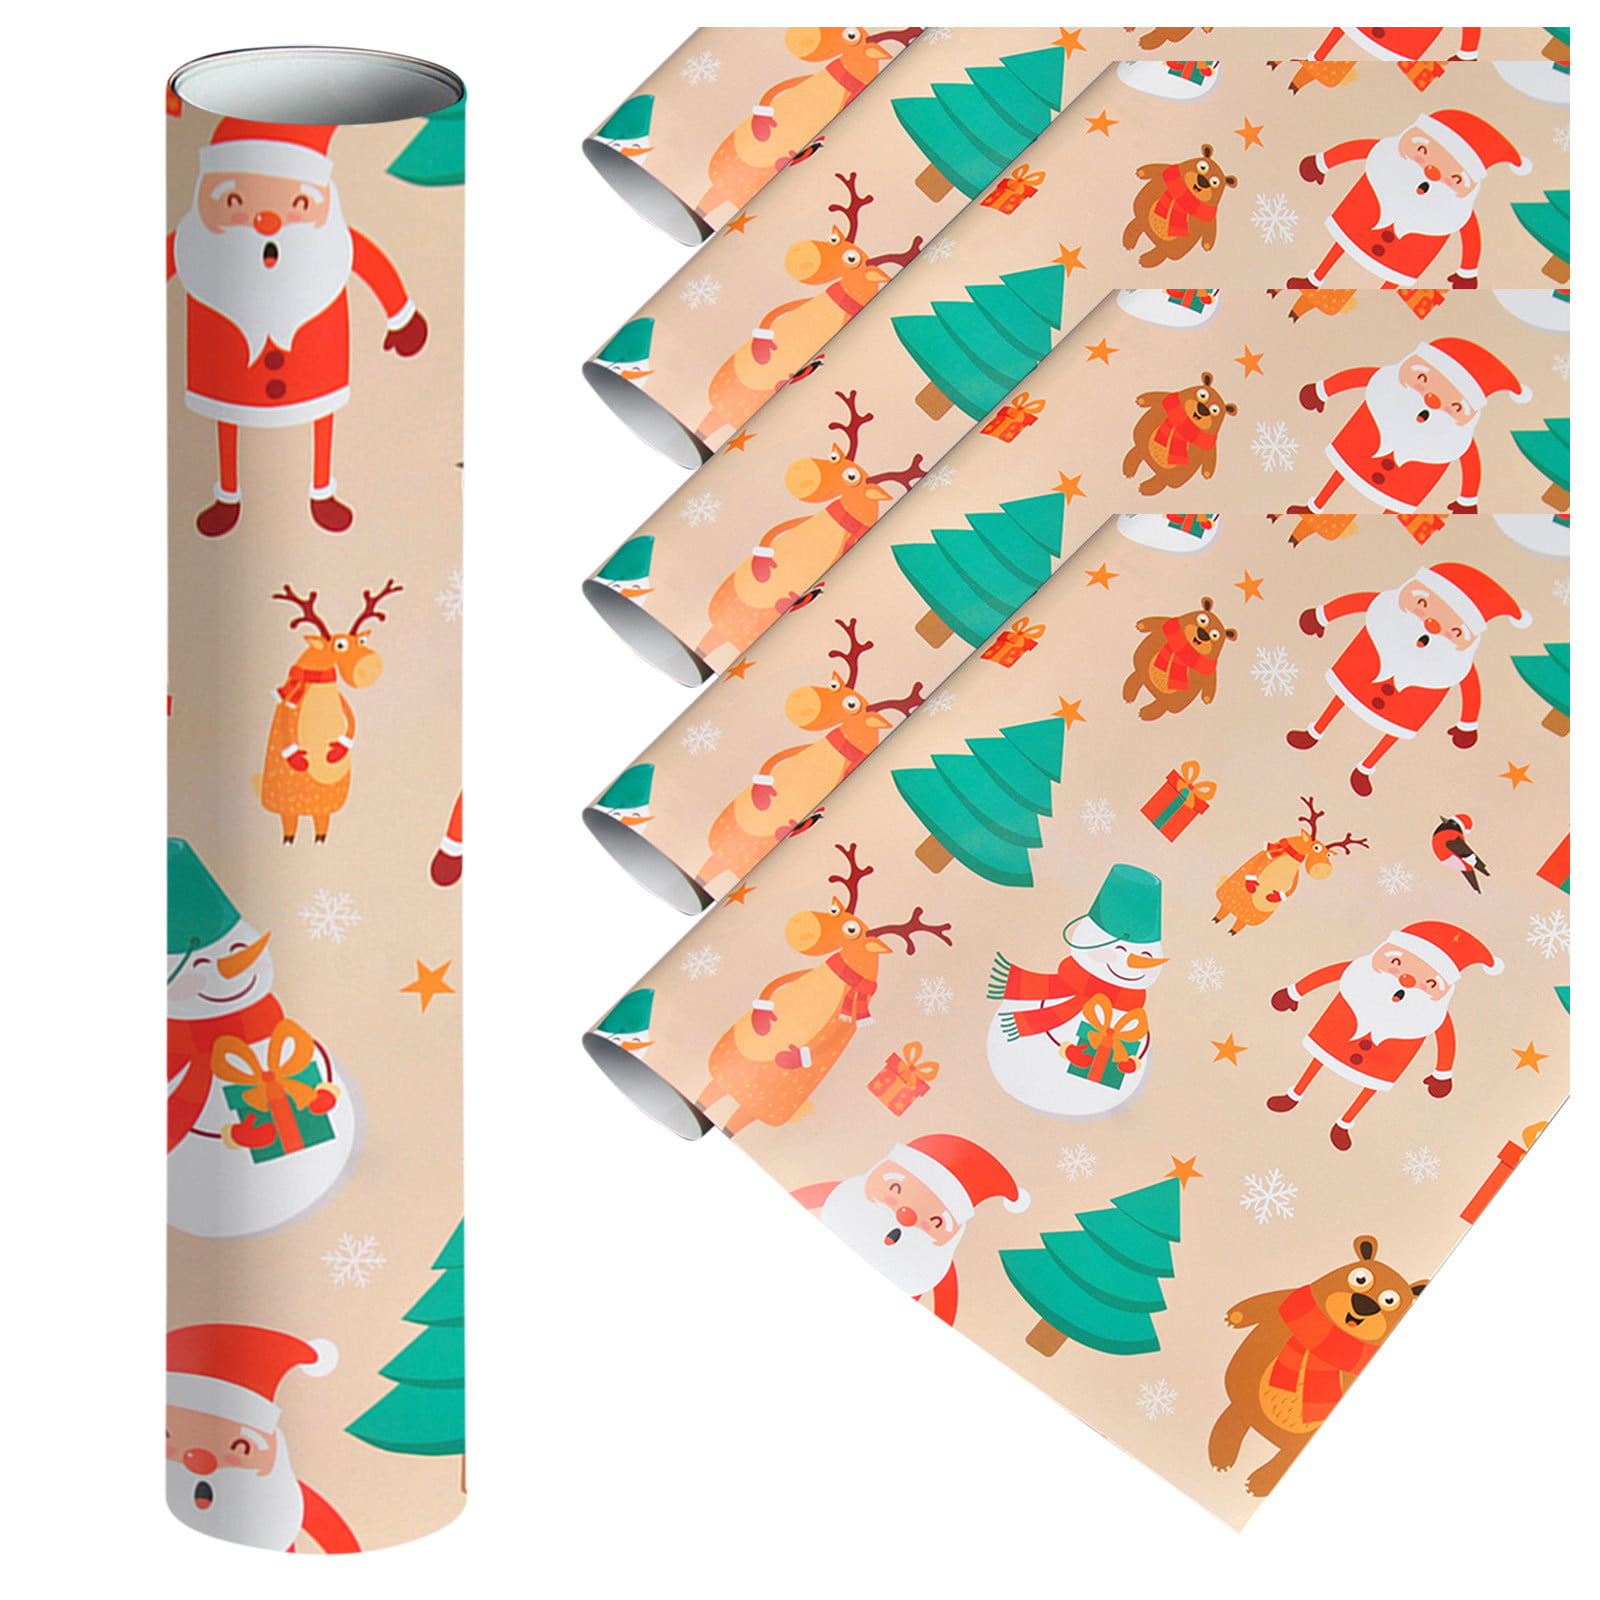 Pjtewawe Christmas Decorations Gift Wrapping Paper DIY Christmas